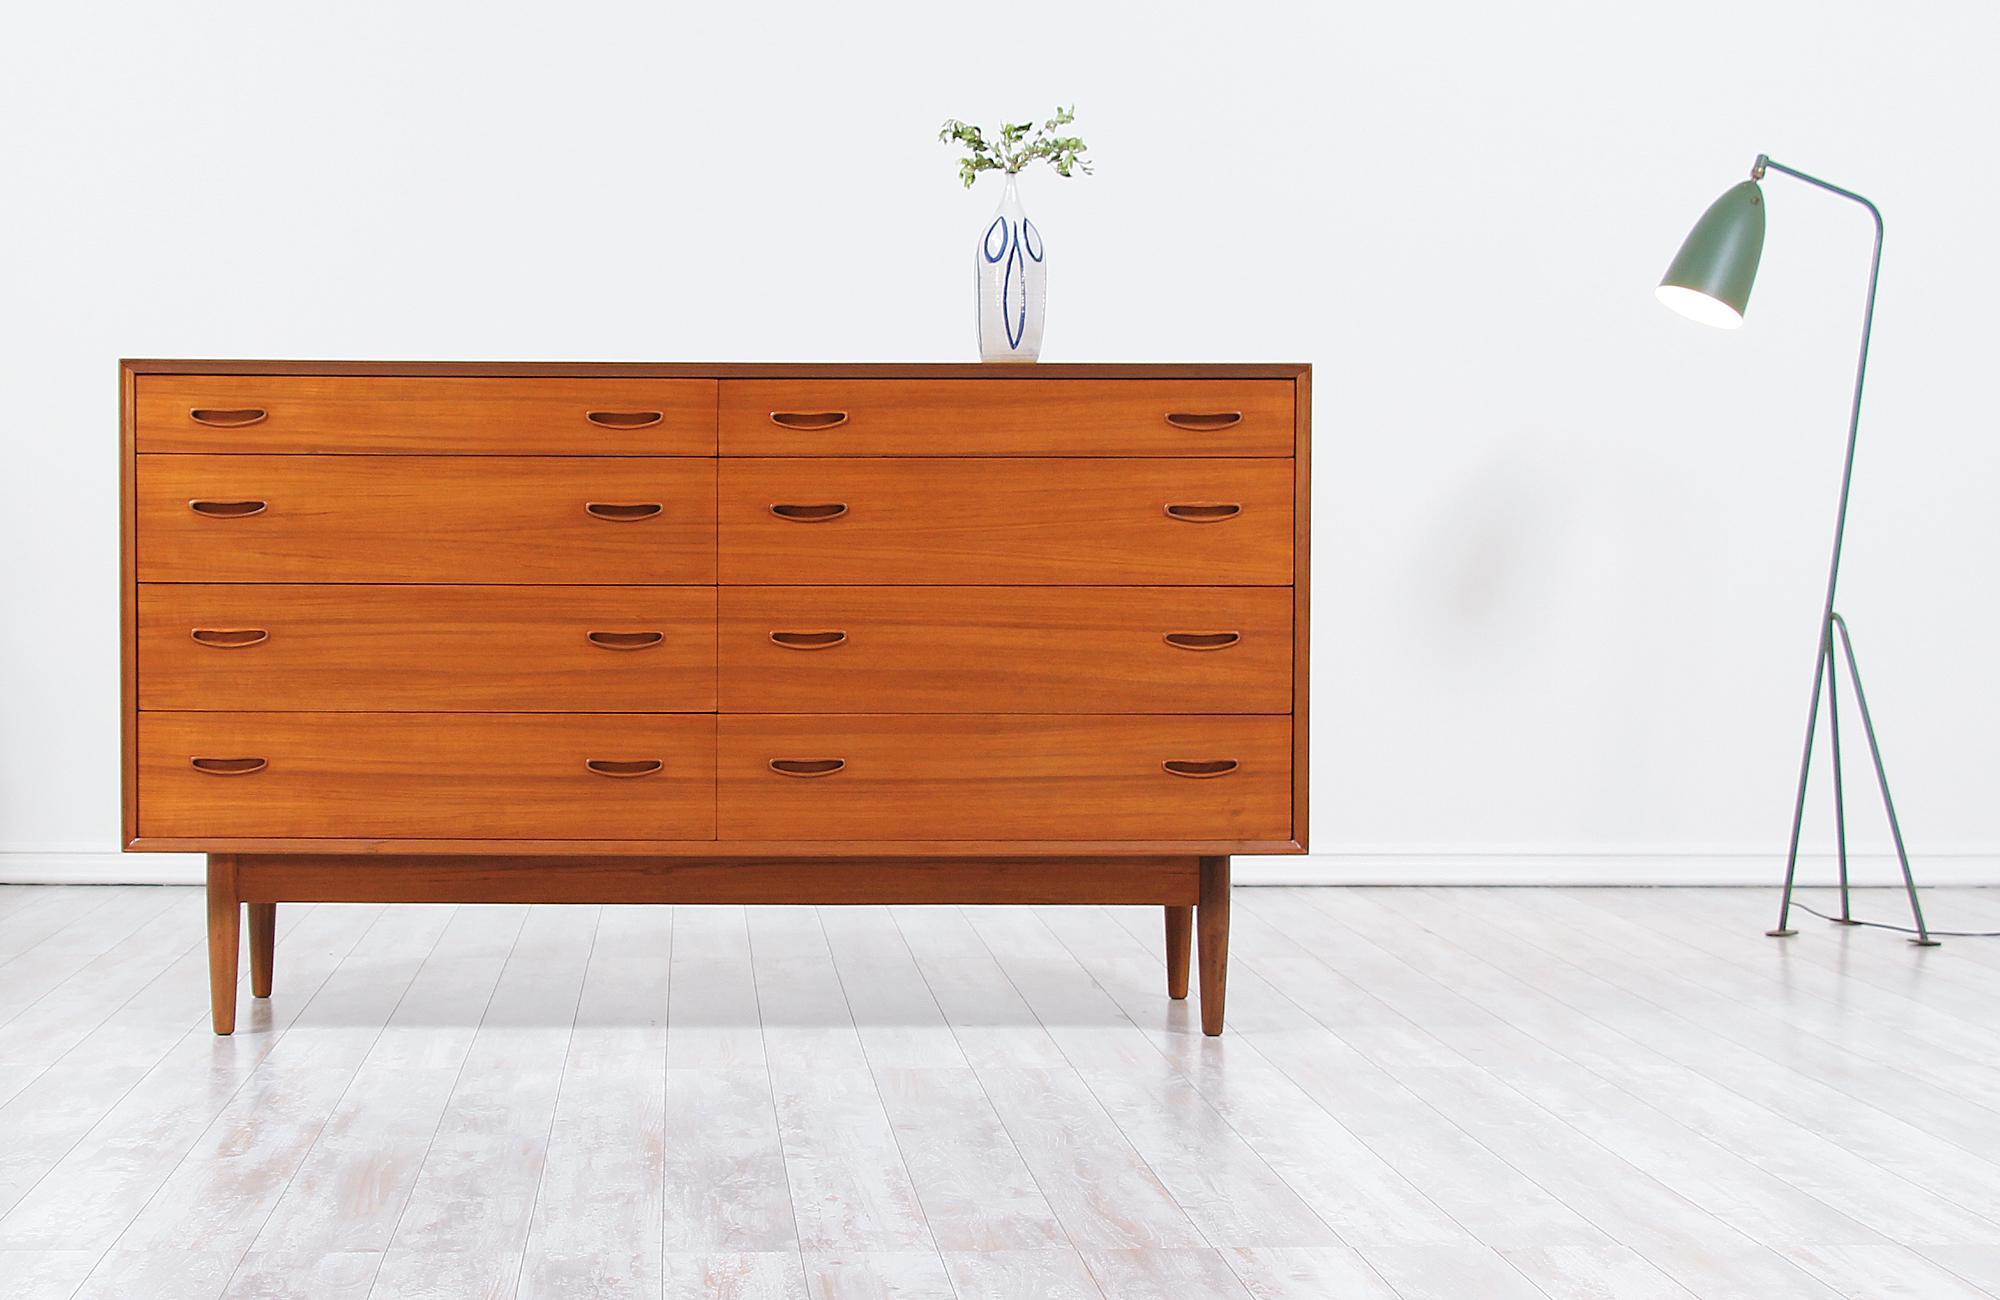 Stylish Danish modern dresser designed and manufactured in Denmark circa 1960s. This dresser features a solid teak wood frame sitting on four tapered legs with wooden stretchers for optimal support. Each of the eight drawers shows two ‘smiley’